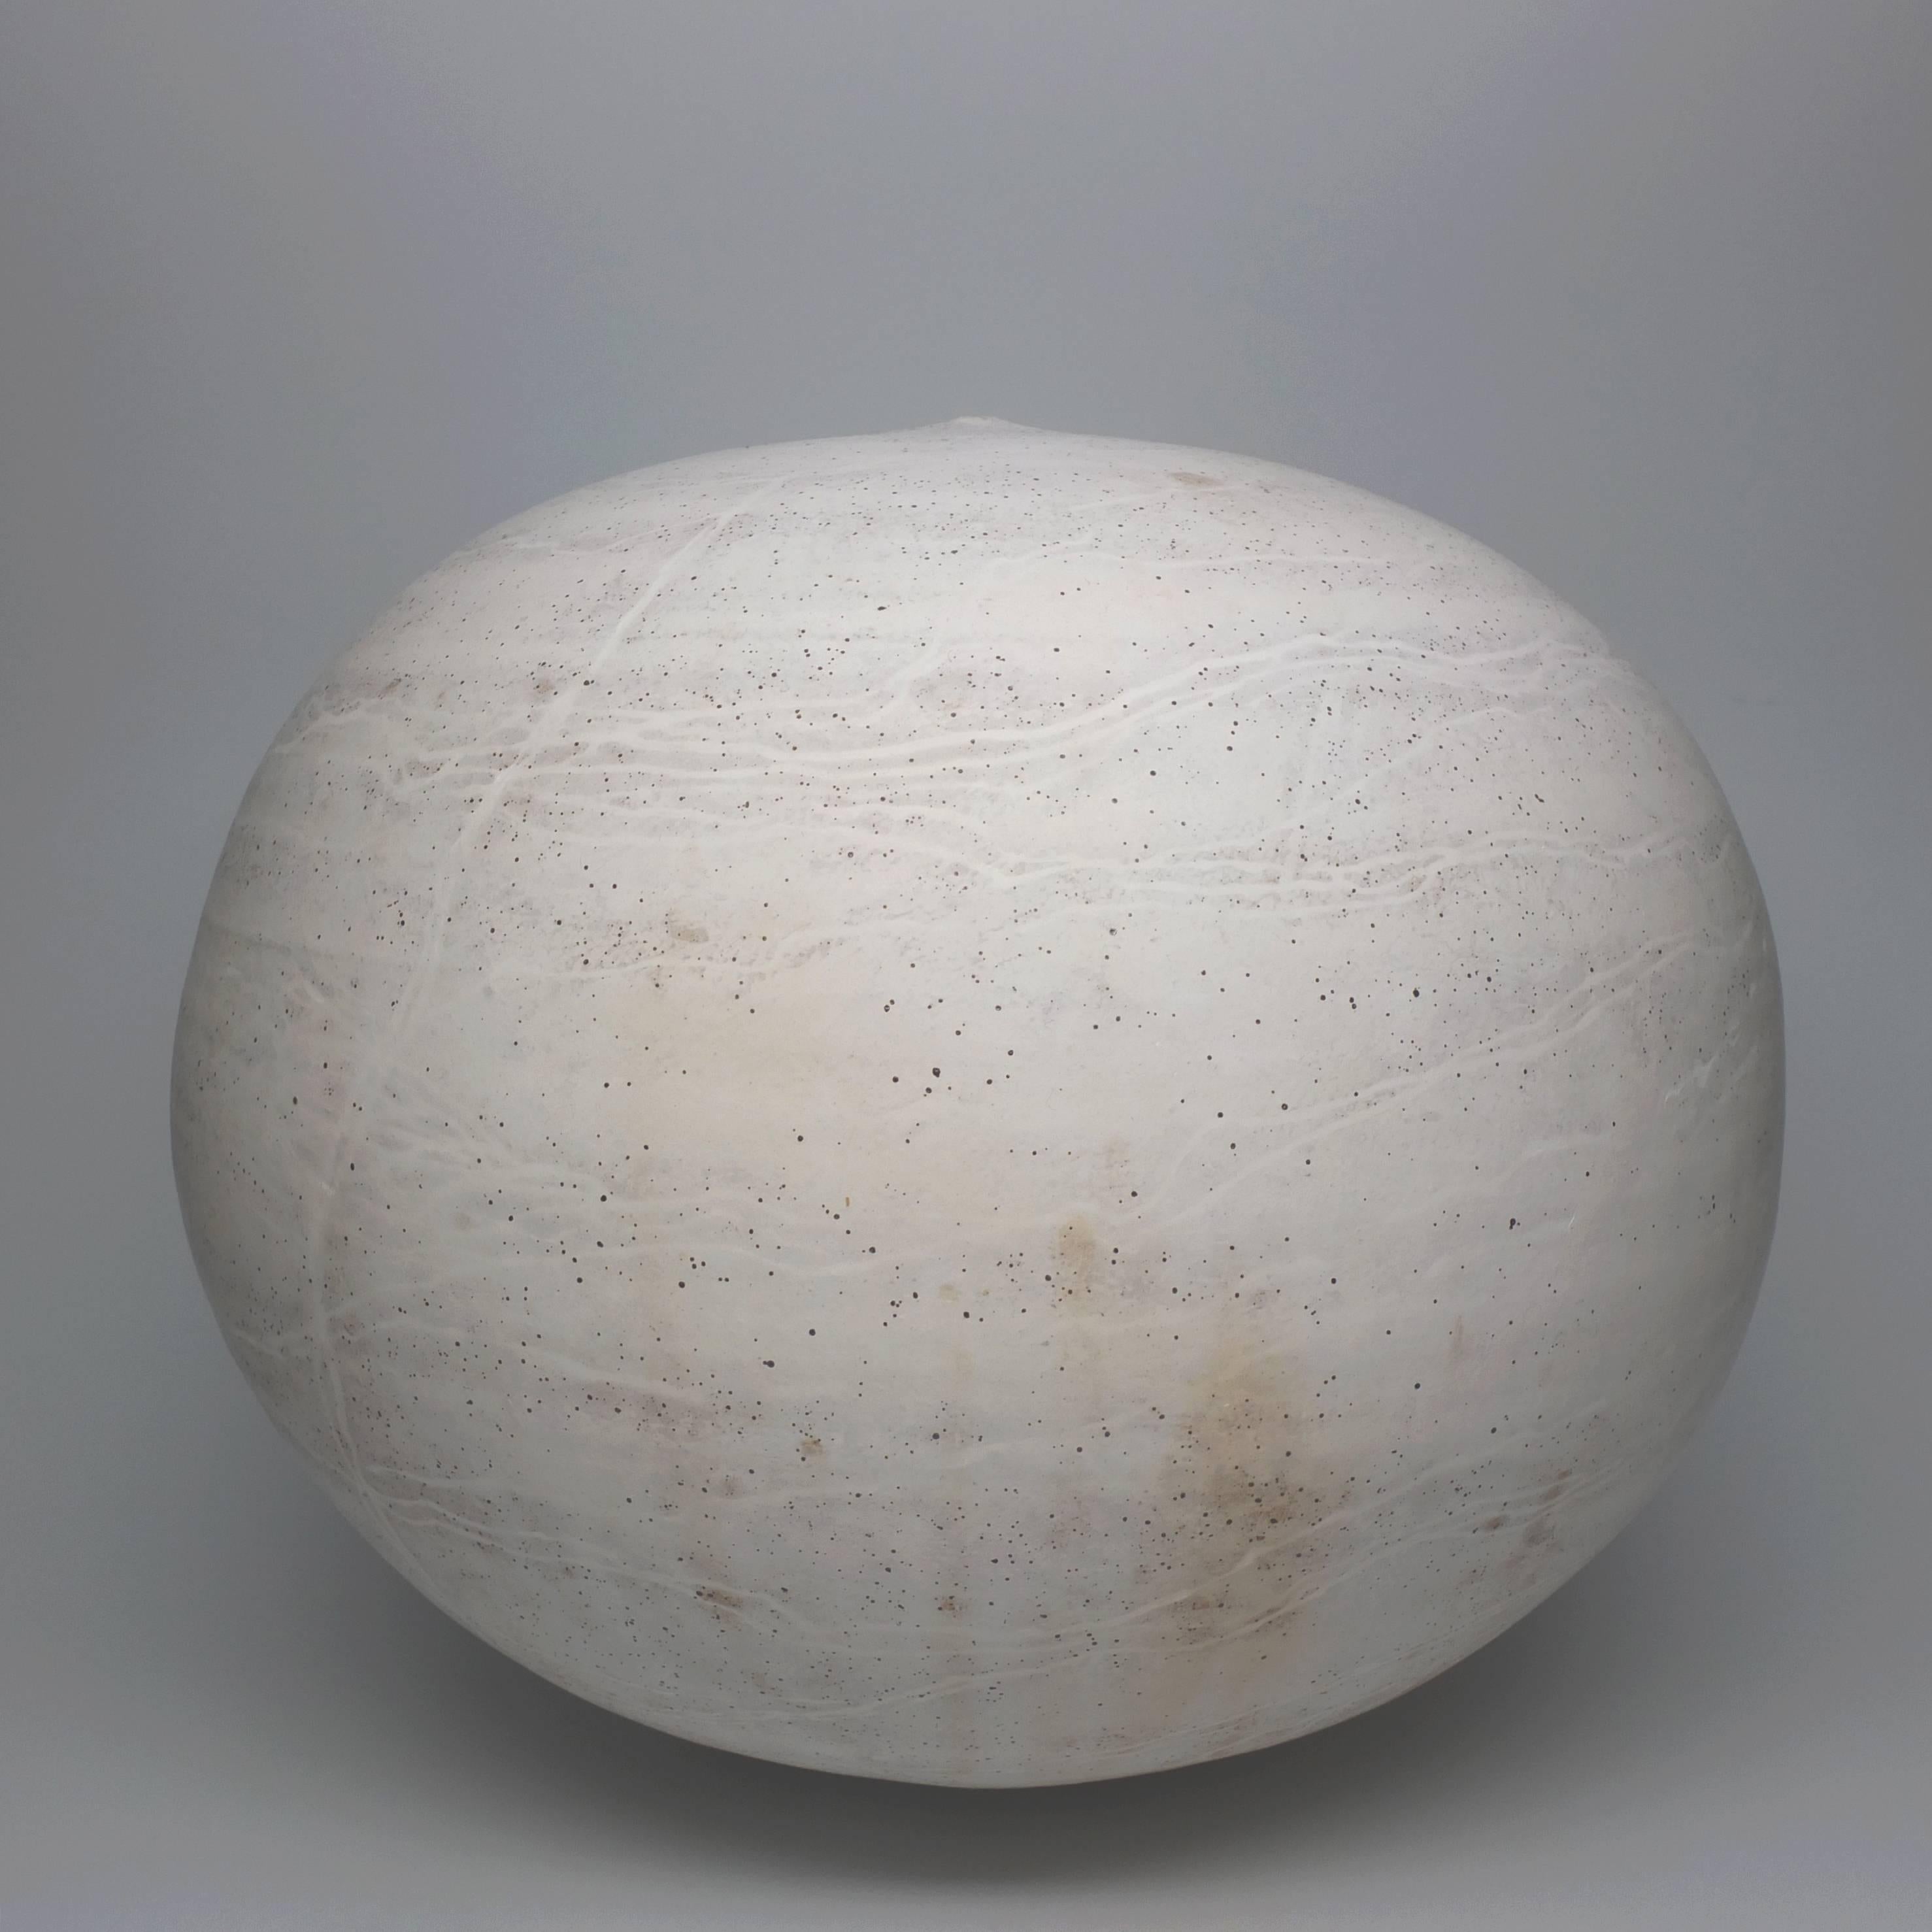 Contemporary Substantial Round Vase or Pot in Matte White by NYC Artist Jeffrey Loura, 2018